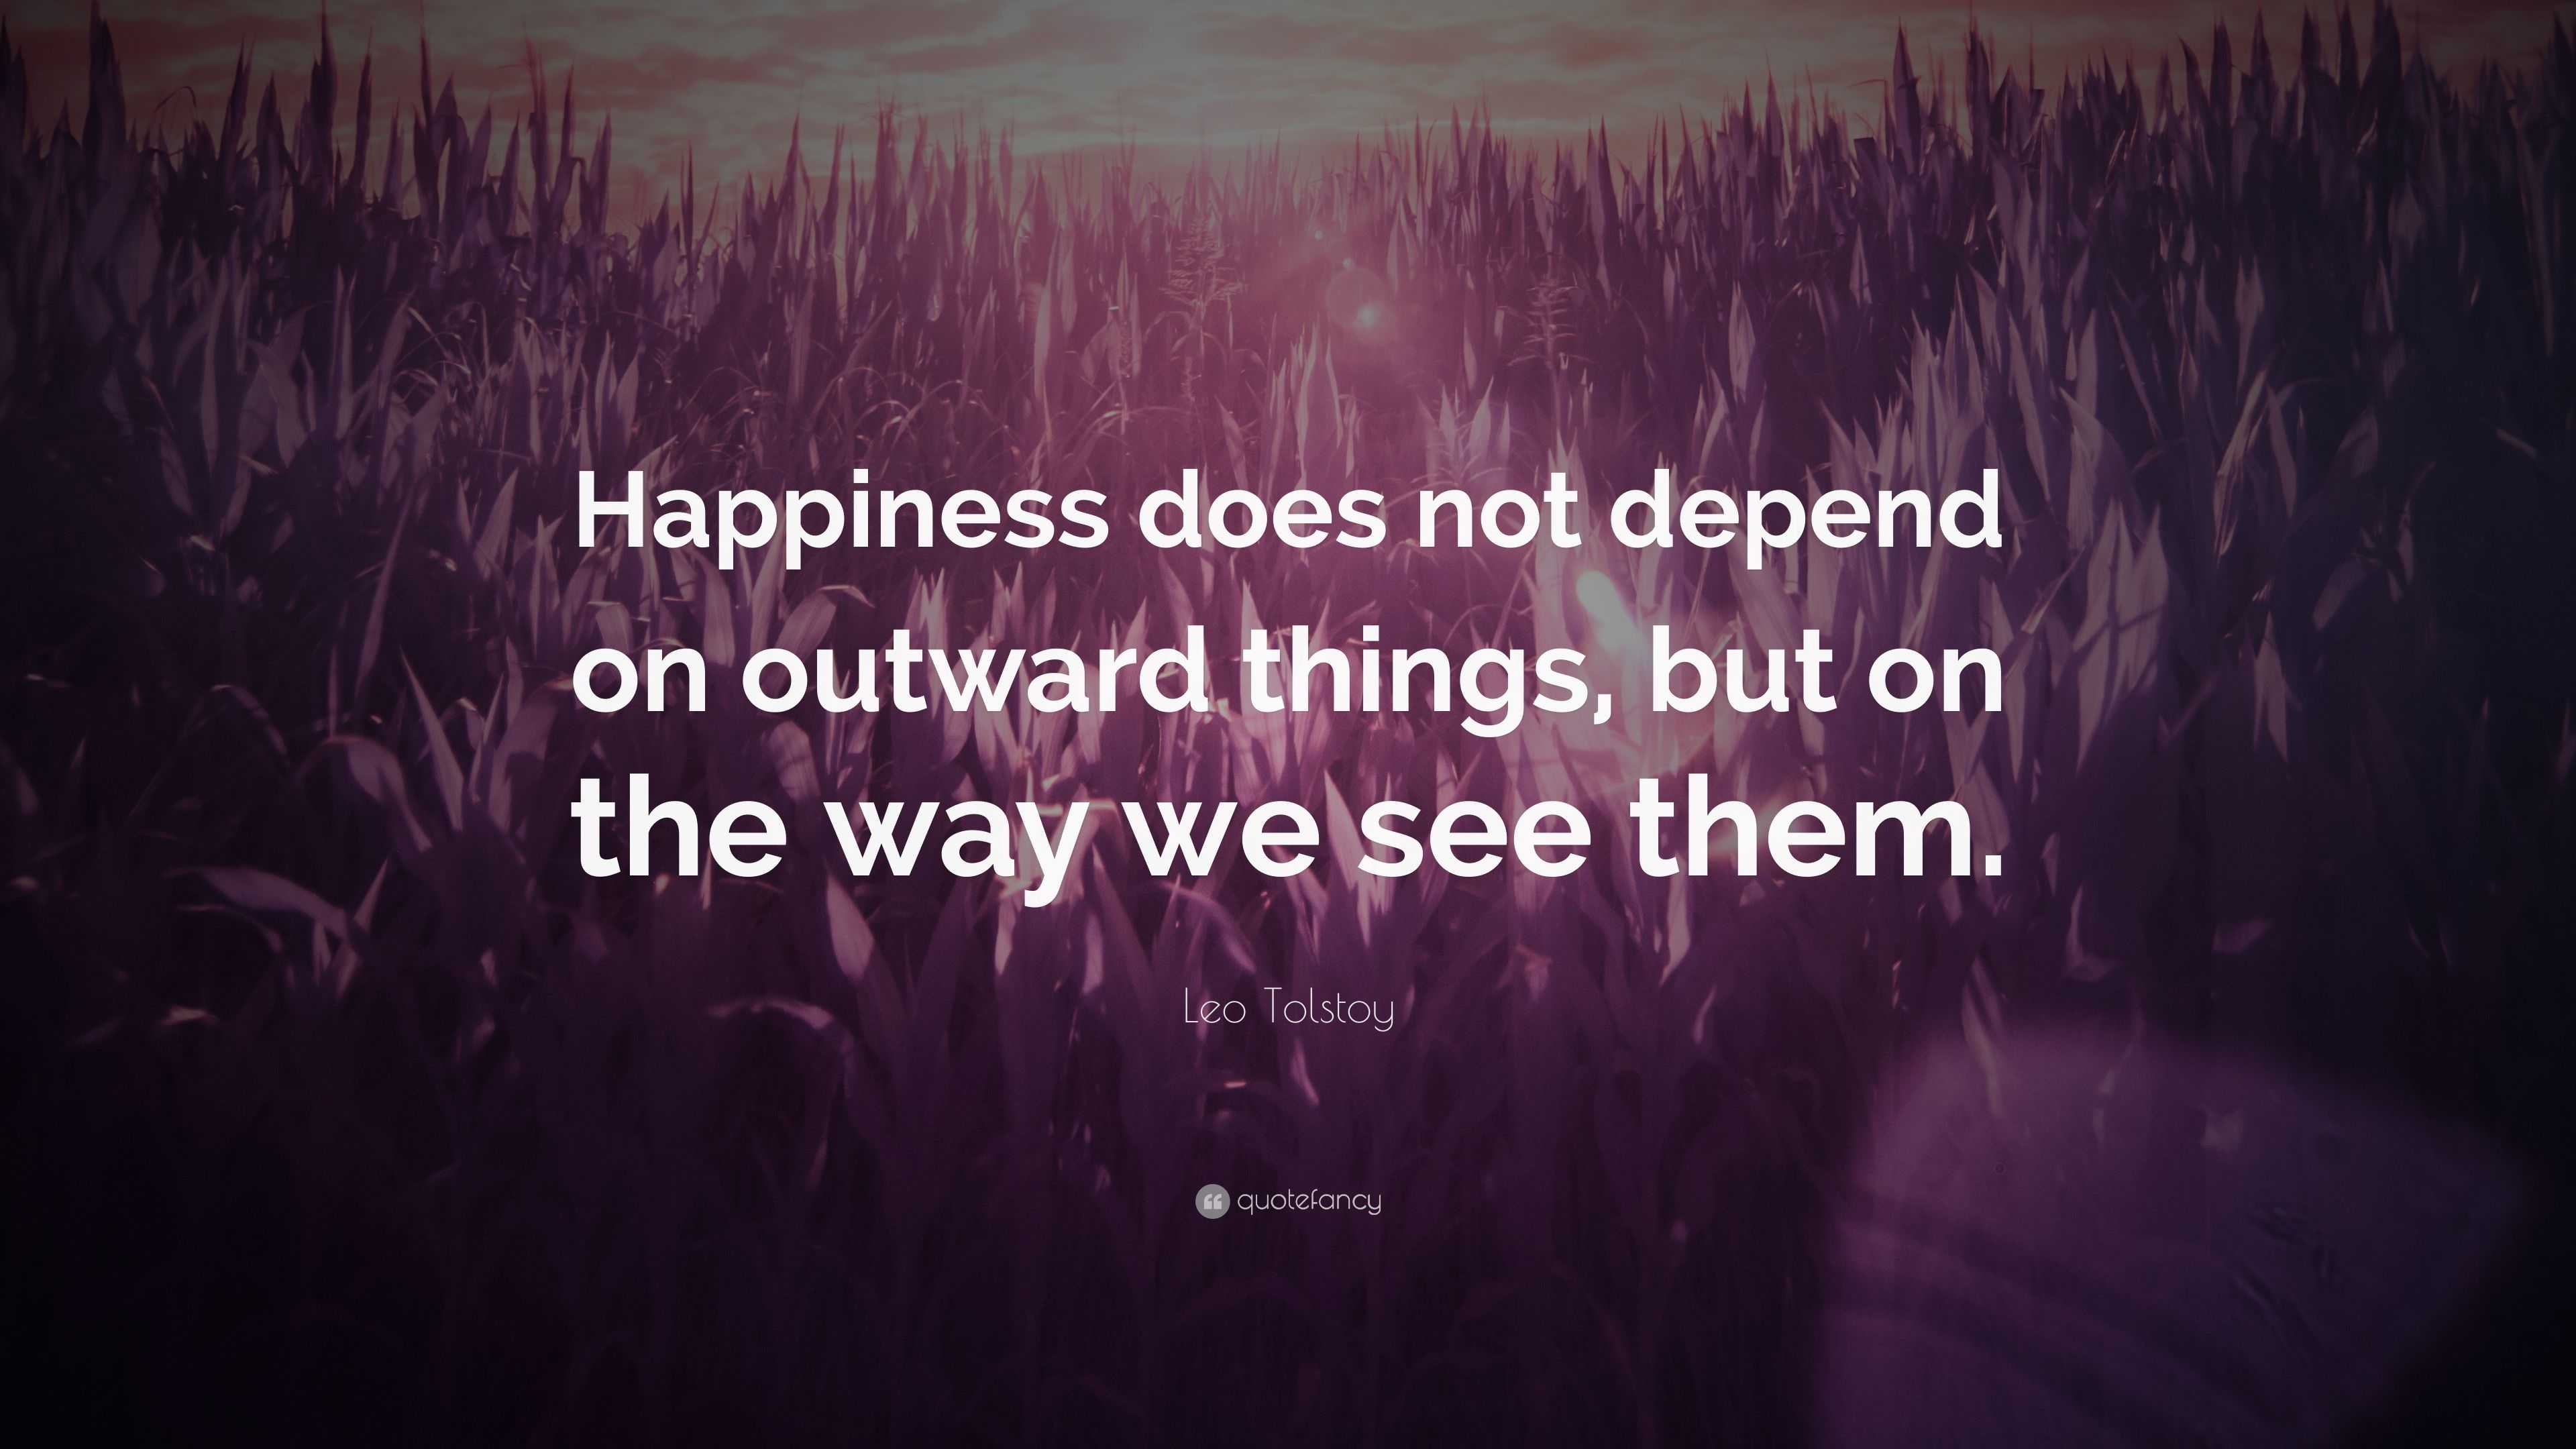 Leo Tolstoy Quote: “Happiness does not depend on outward things, but on